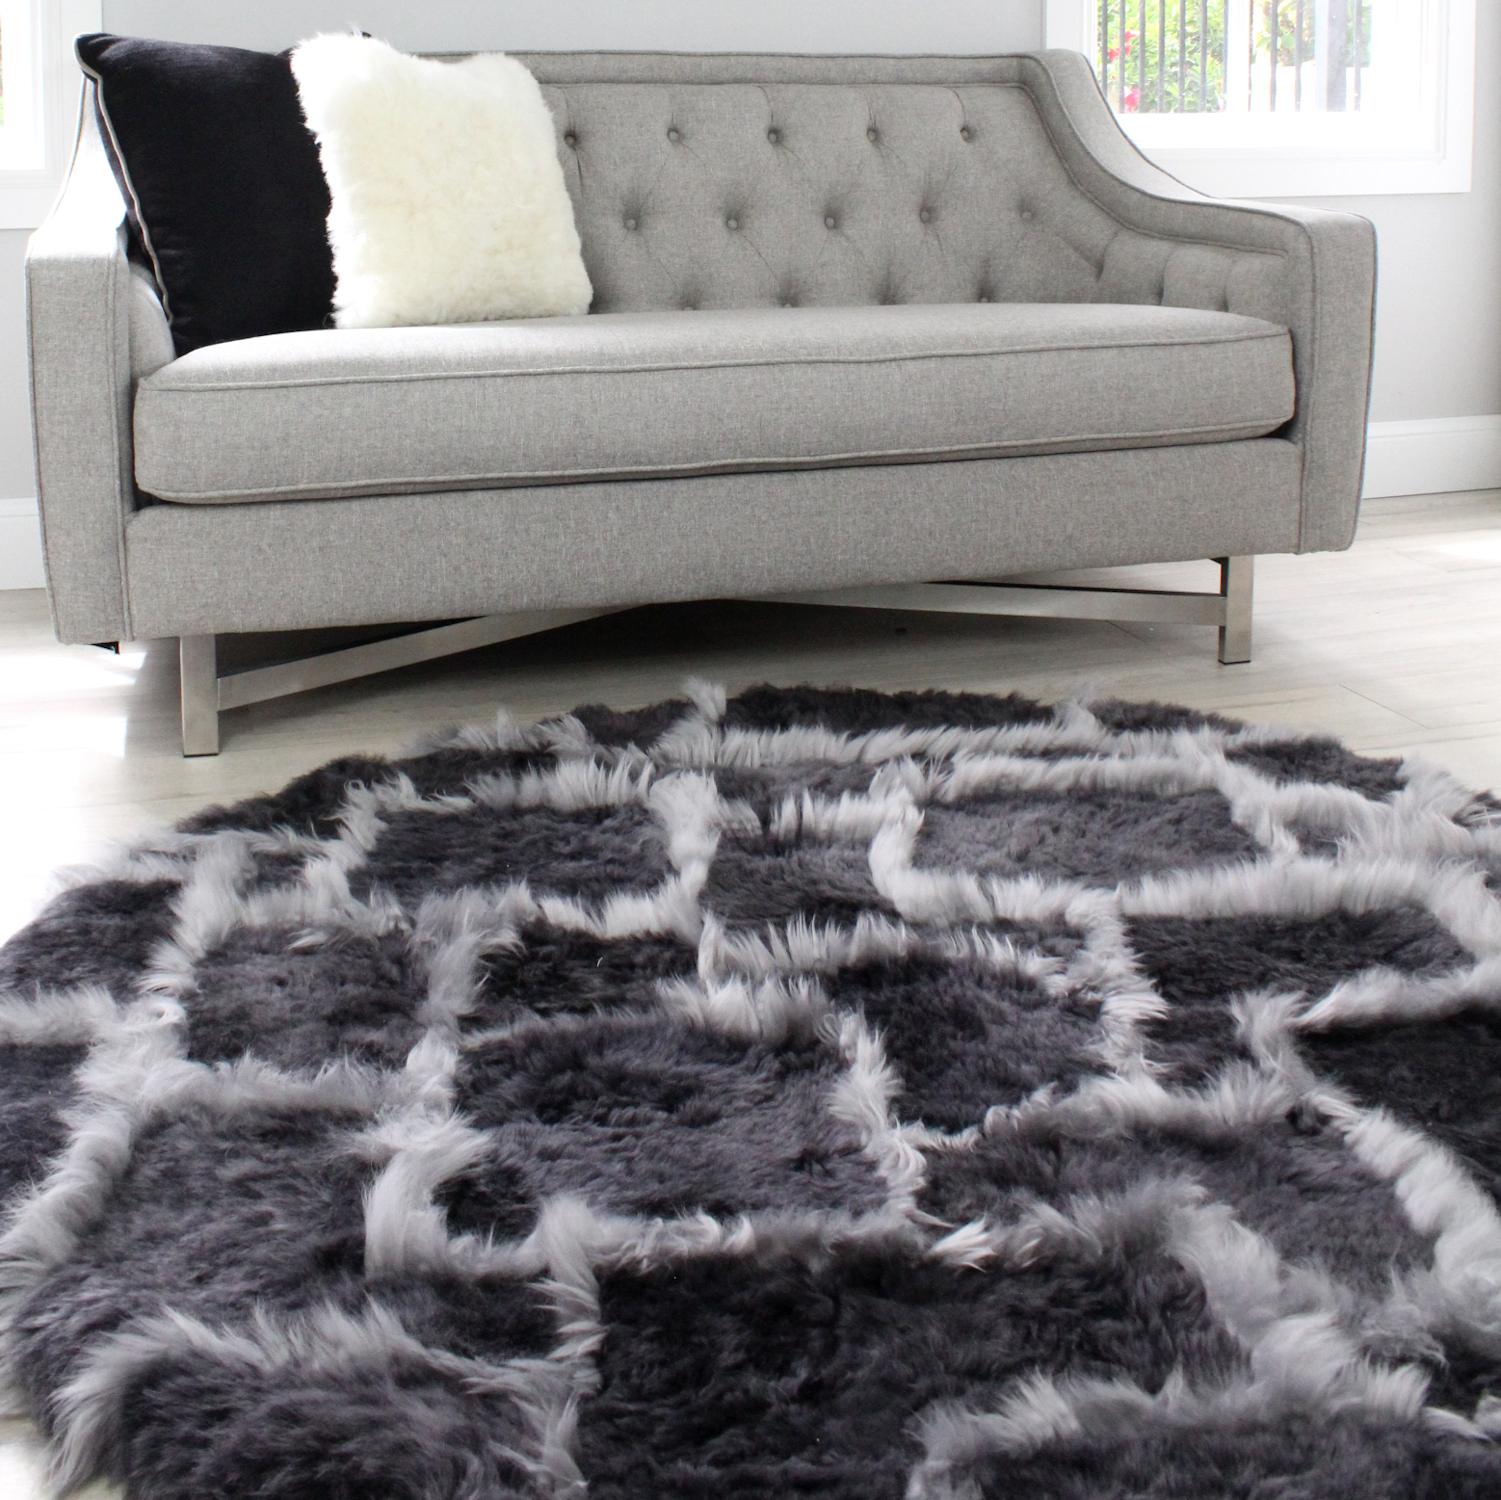 This Treasure Patchwork Sheepskin rug is a rare and unique designer floor rug custom made by eluxury home. It is handcrafted in Australia with intricate patchwork detailing with unparalleled sheepskin craftsmanship using only the finest of